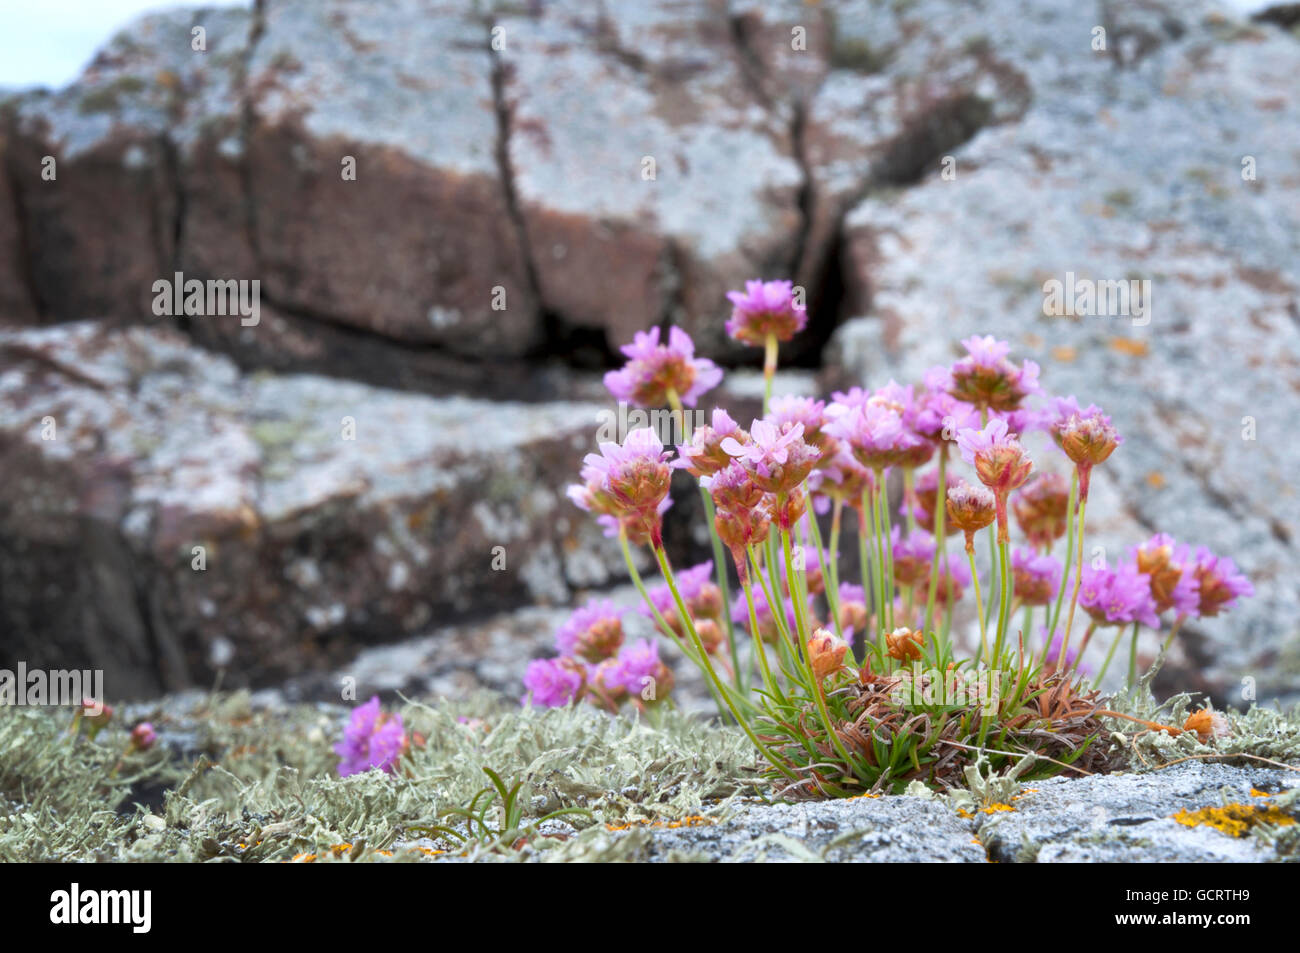 Armeria maritima, commonly known as thrift, sea thrift or sea pink, growing on rocks in County Donegal, Ireland Stock Photo